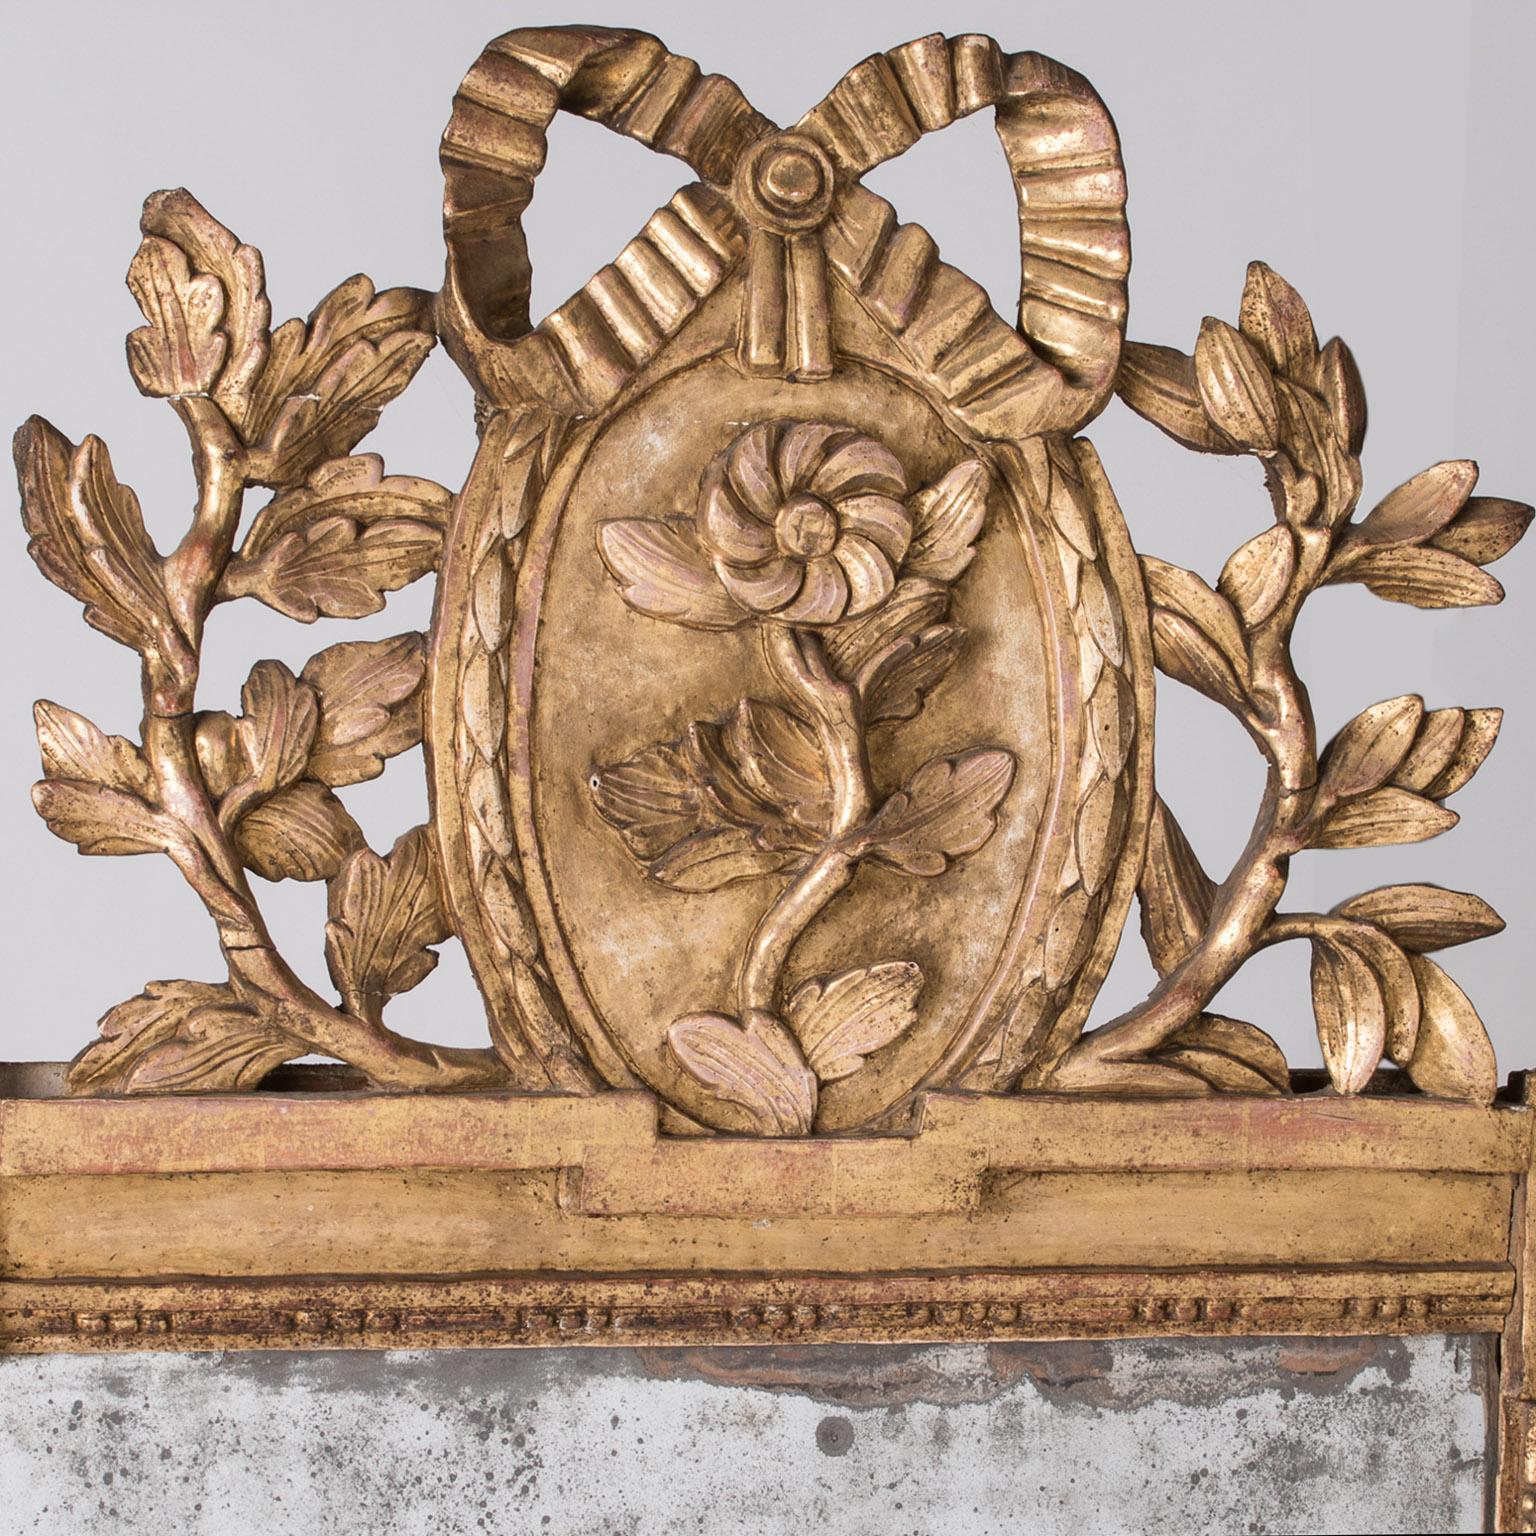 This mirror is a beauty, with original gilt throughout, and all the decorative details intact and in good condition. The top is adorned with a masterful bow over an oval medallion, framing a flower surrounded by leaves and vines. The divided